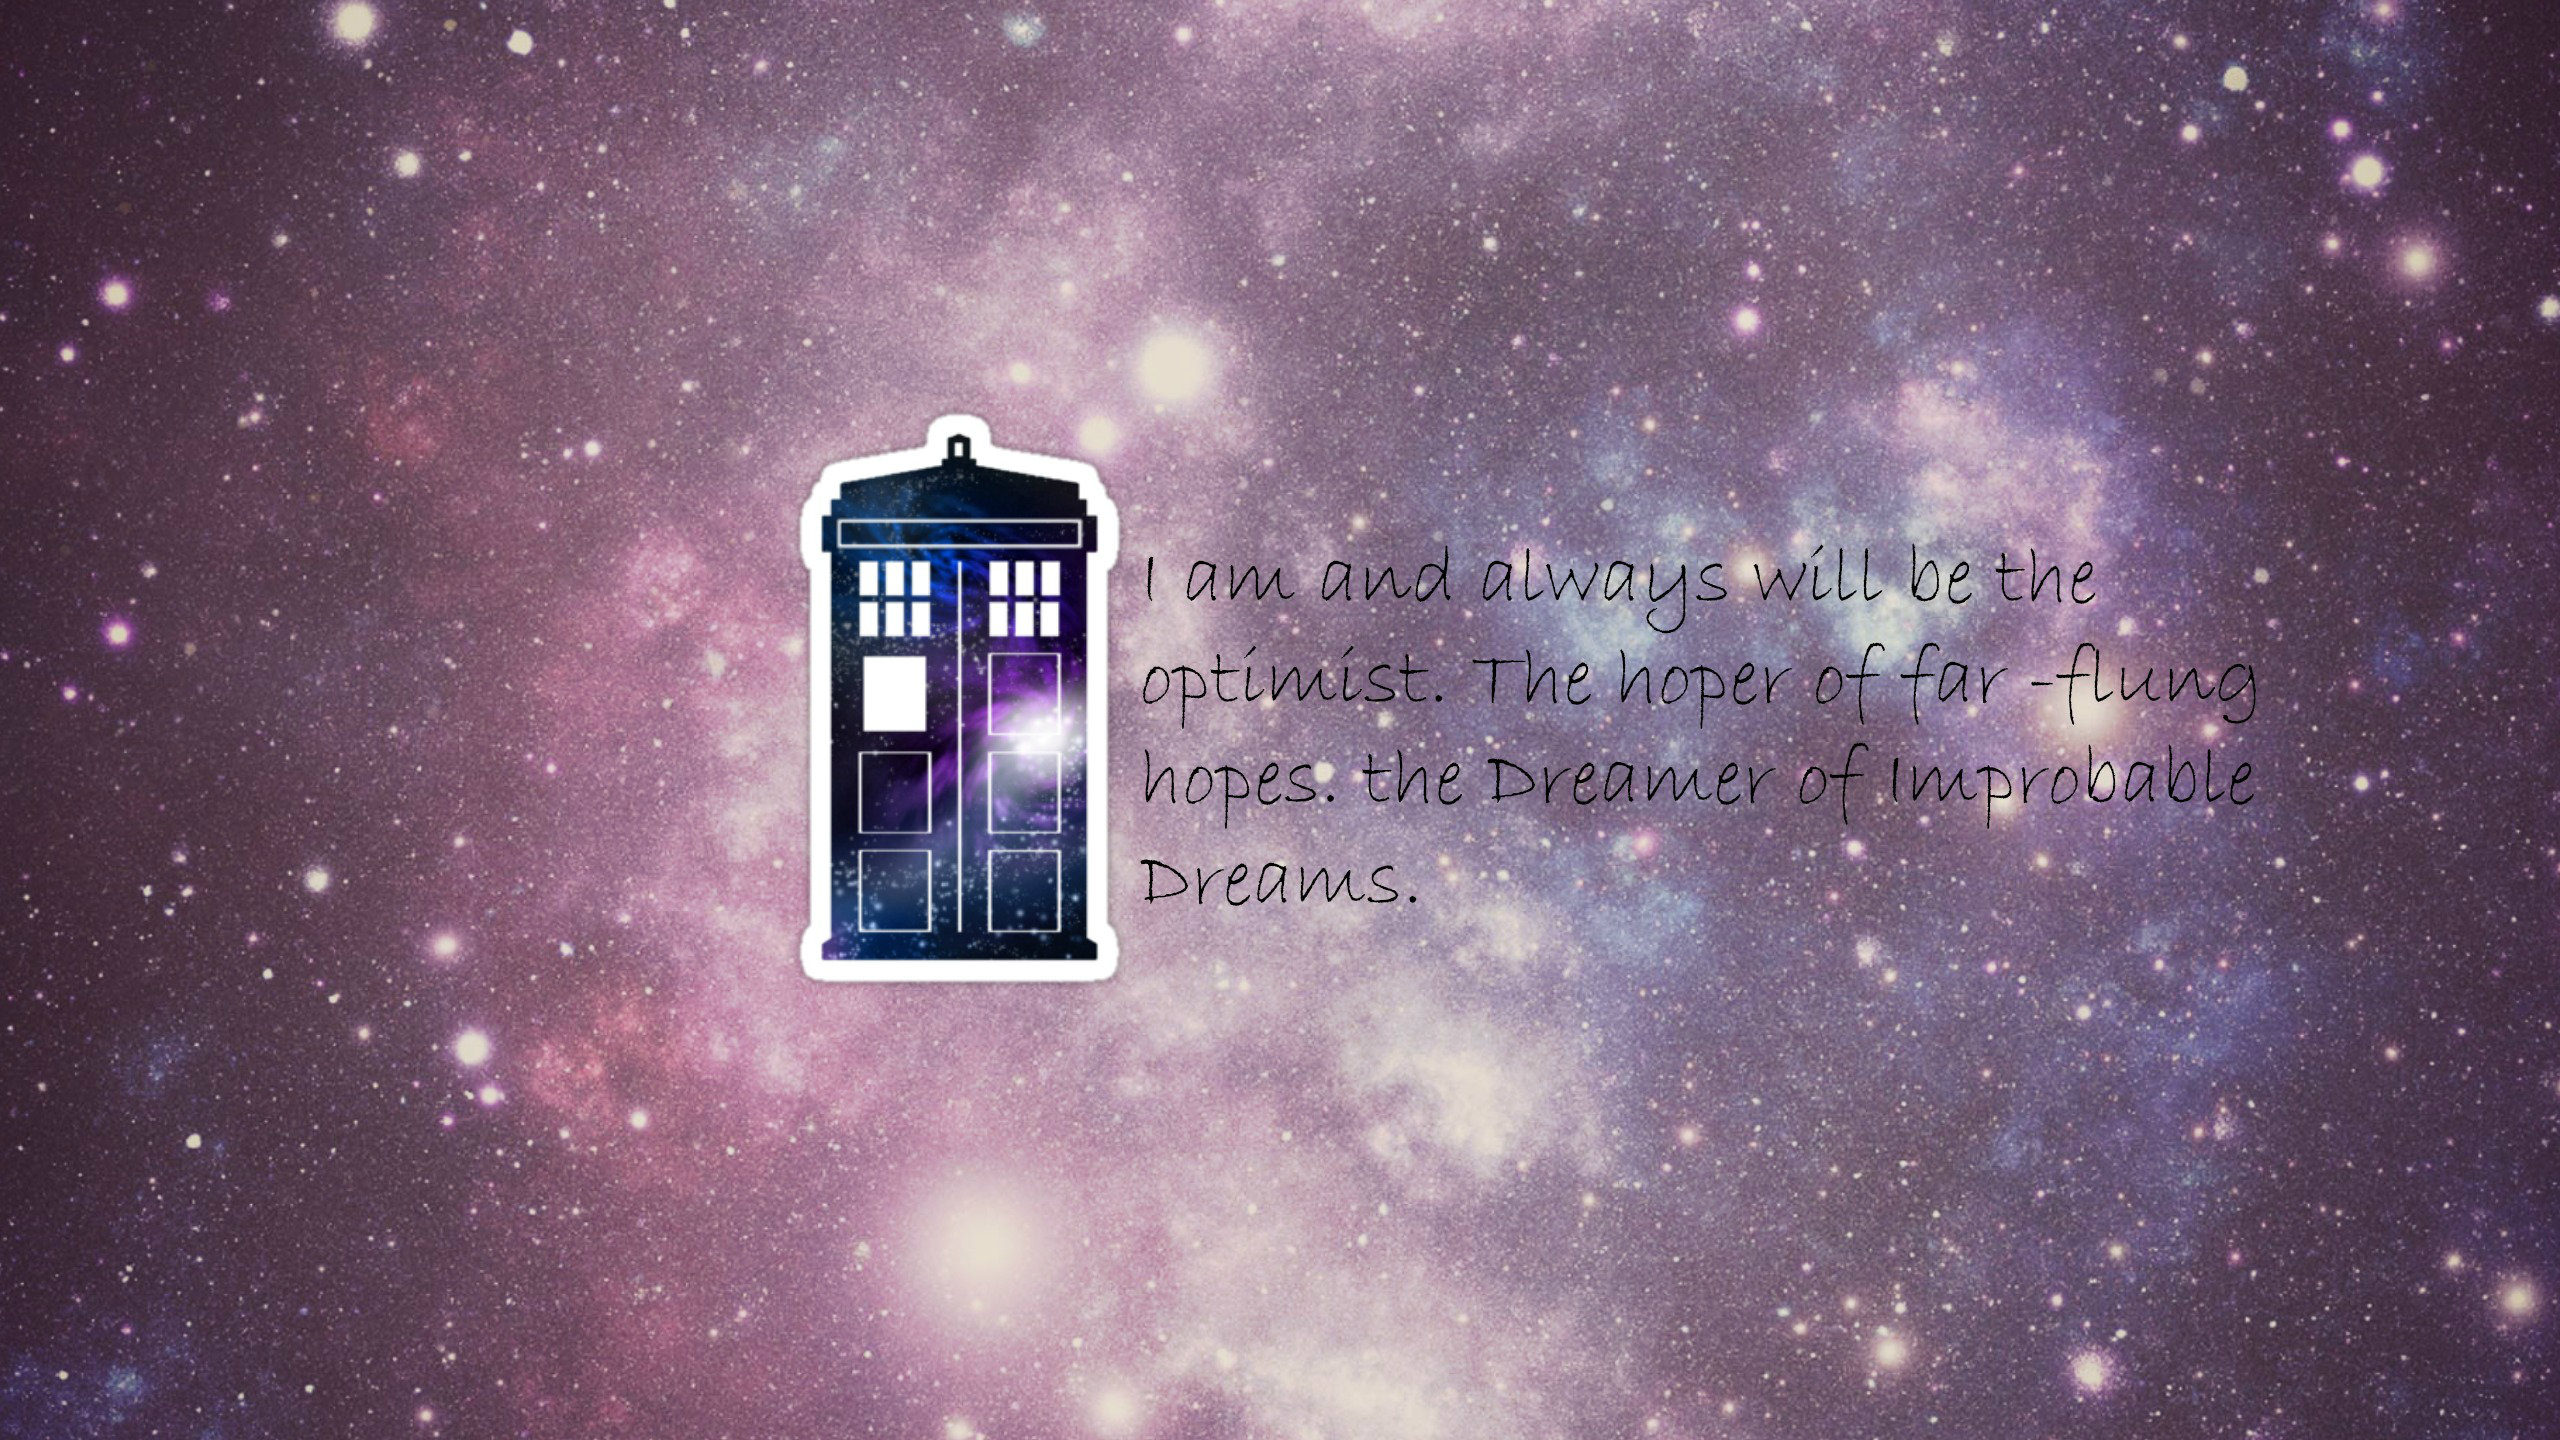 Tardis Wallpaper - Doctor Who Wallpapers Quotes - HD Wallpaper 